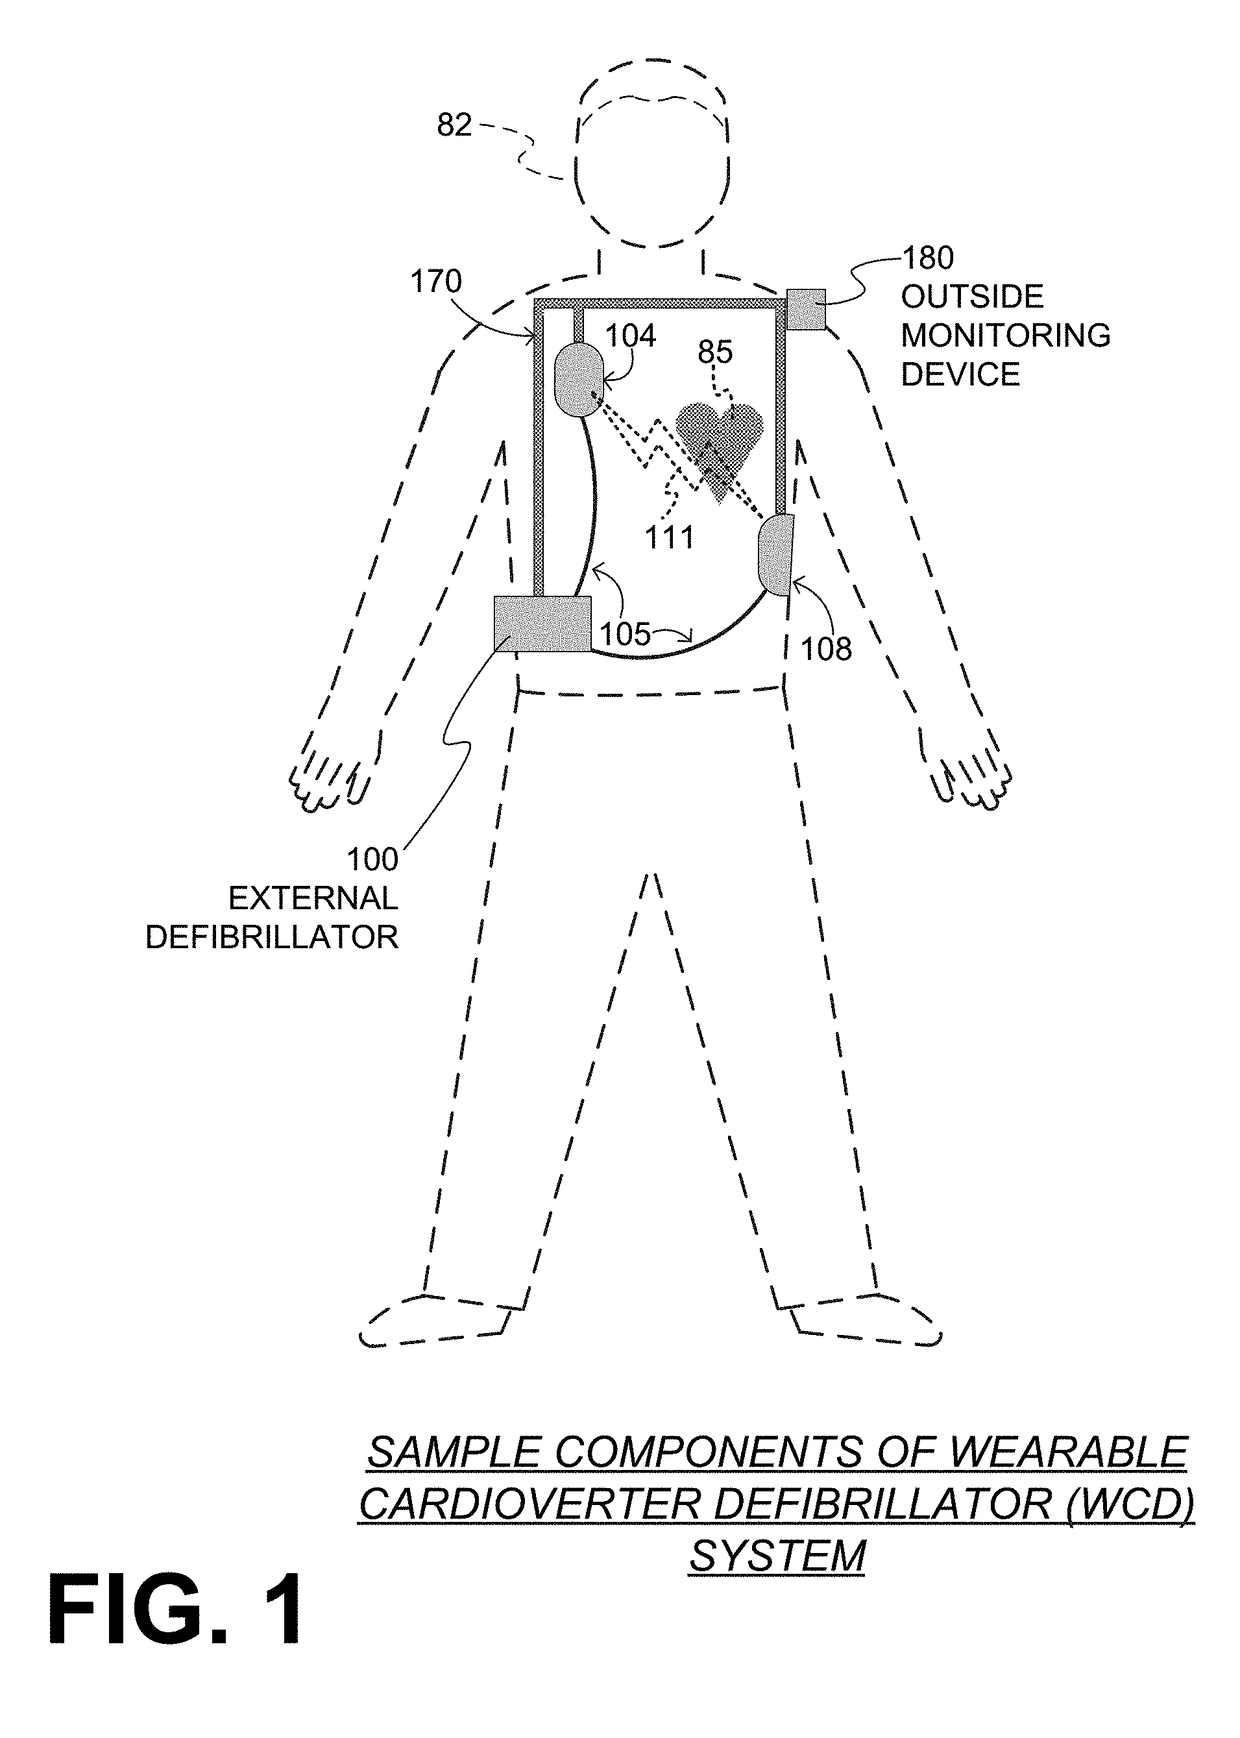 Wearable cardioverter defibrillator (WCD) system reacting to high-frequency ECG noise